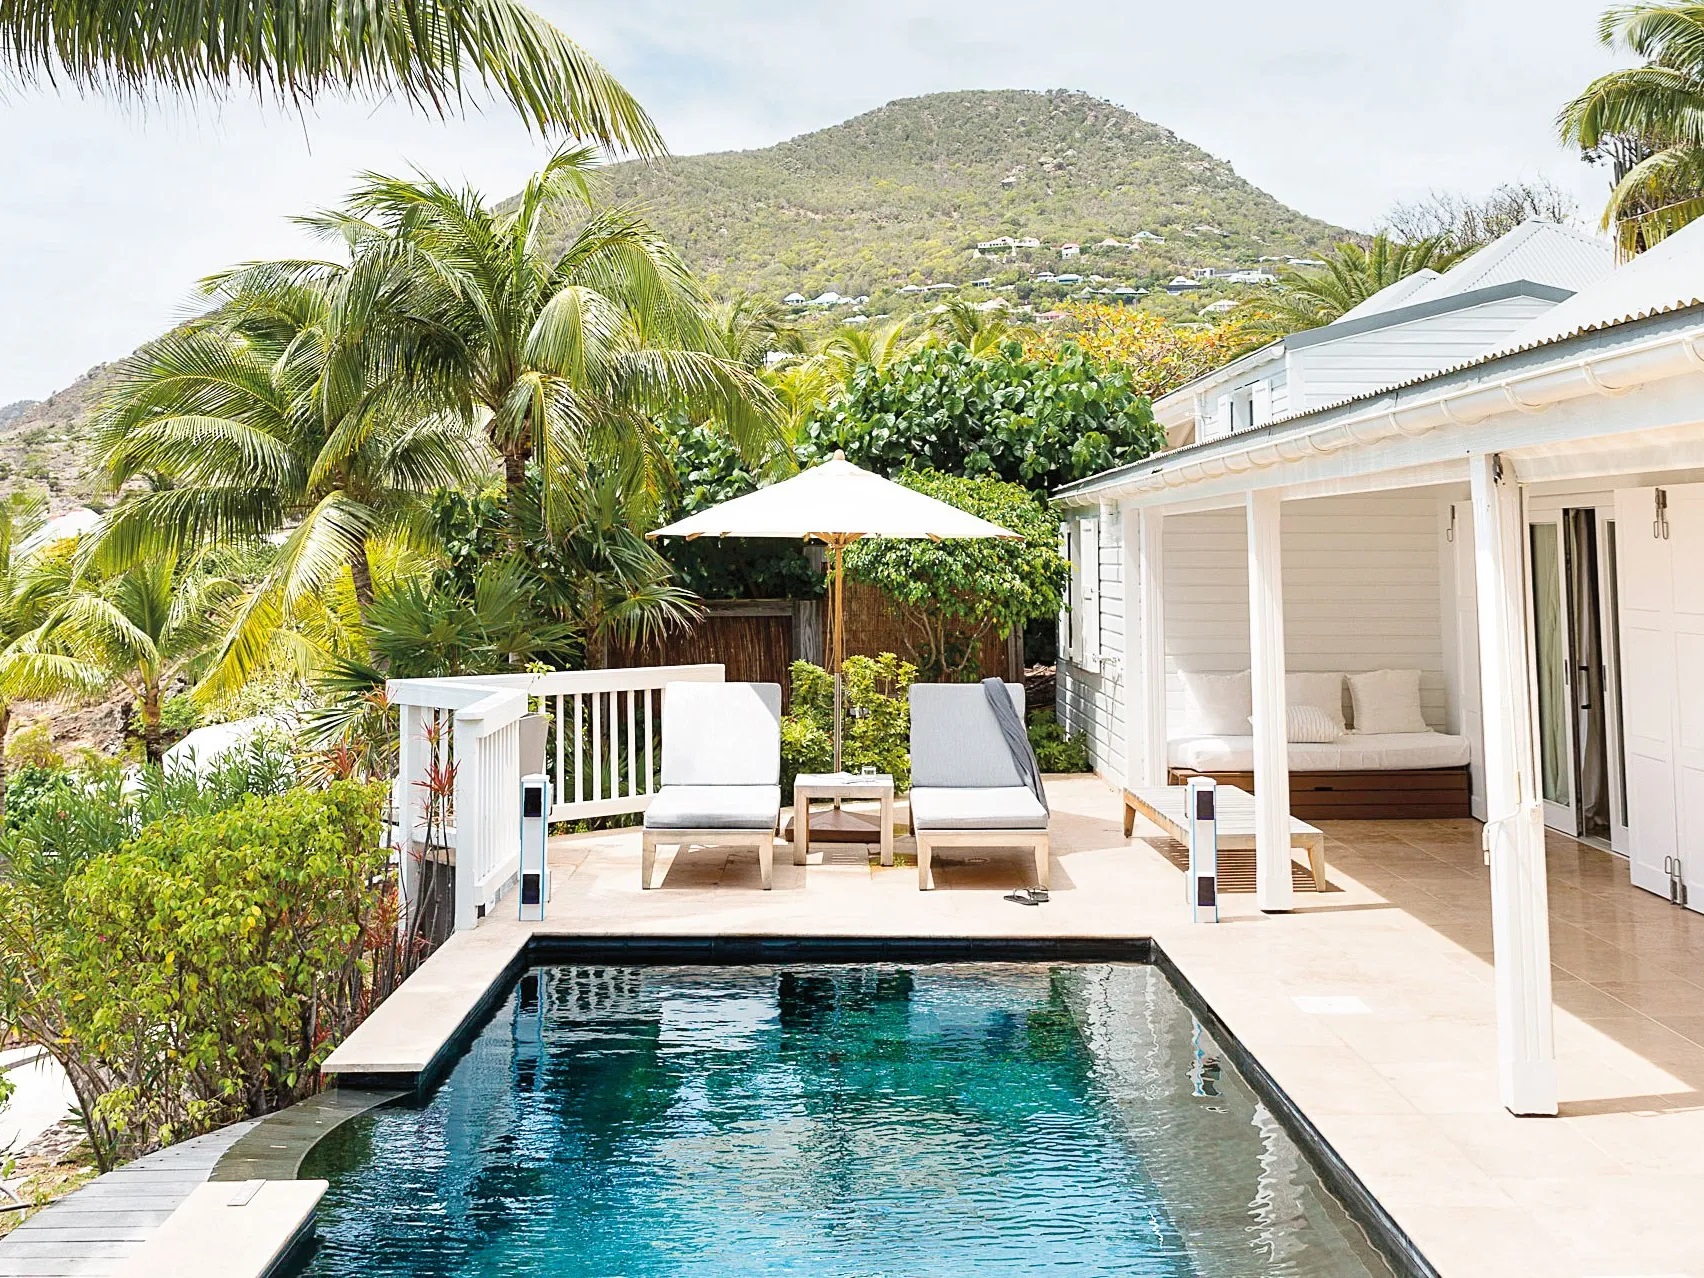 Hotel Le Toiny St. Barth: A Haven of Serenity and Secluded Charm